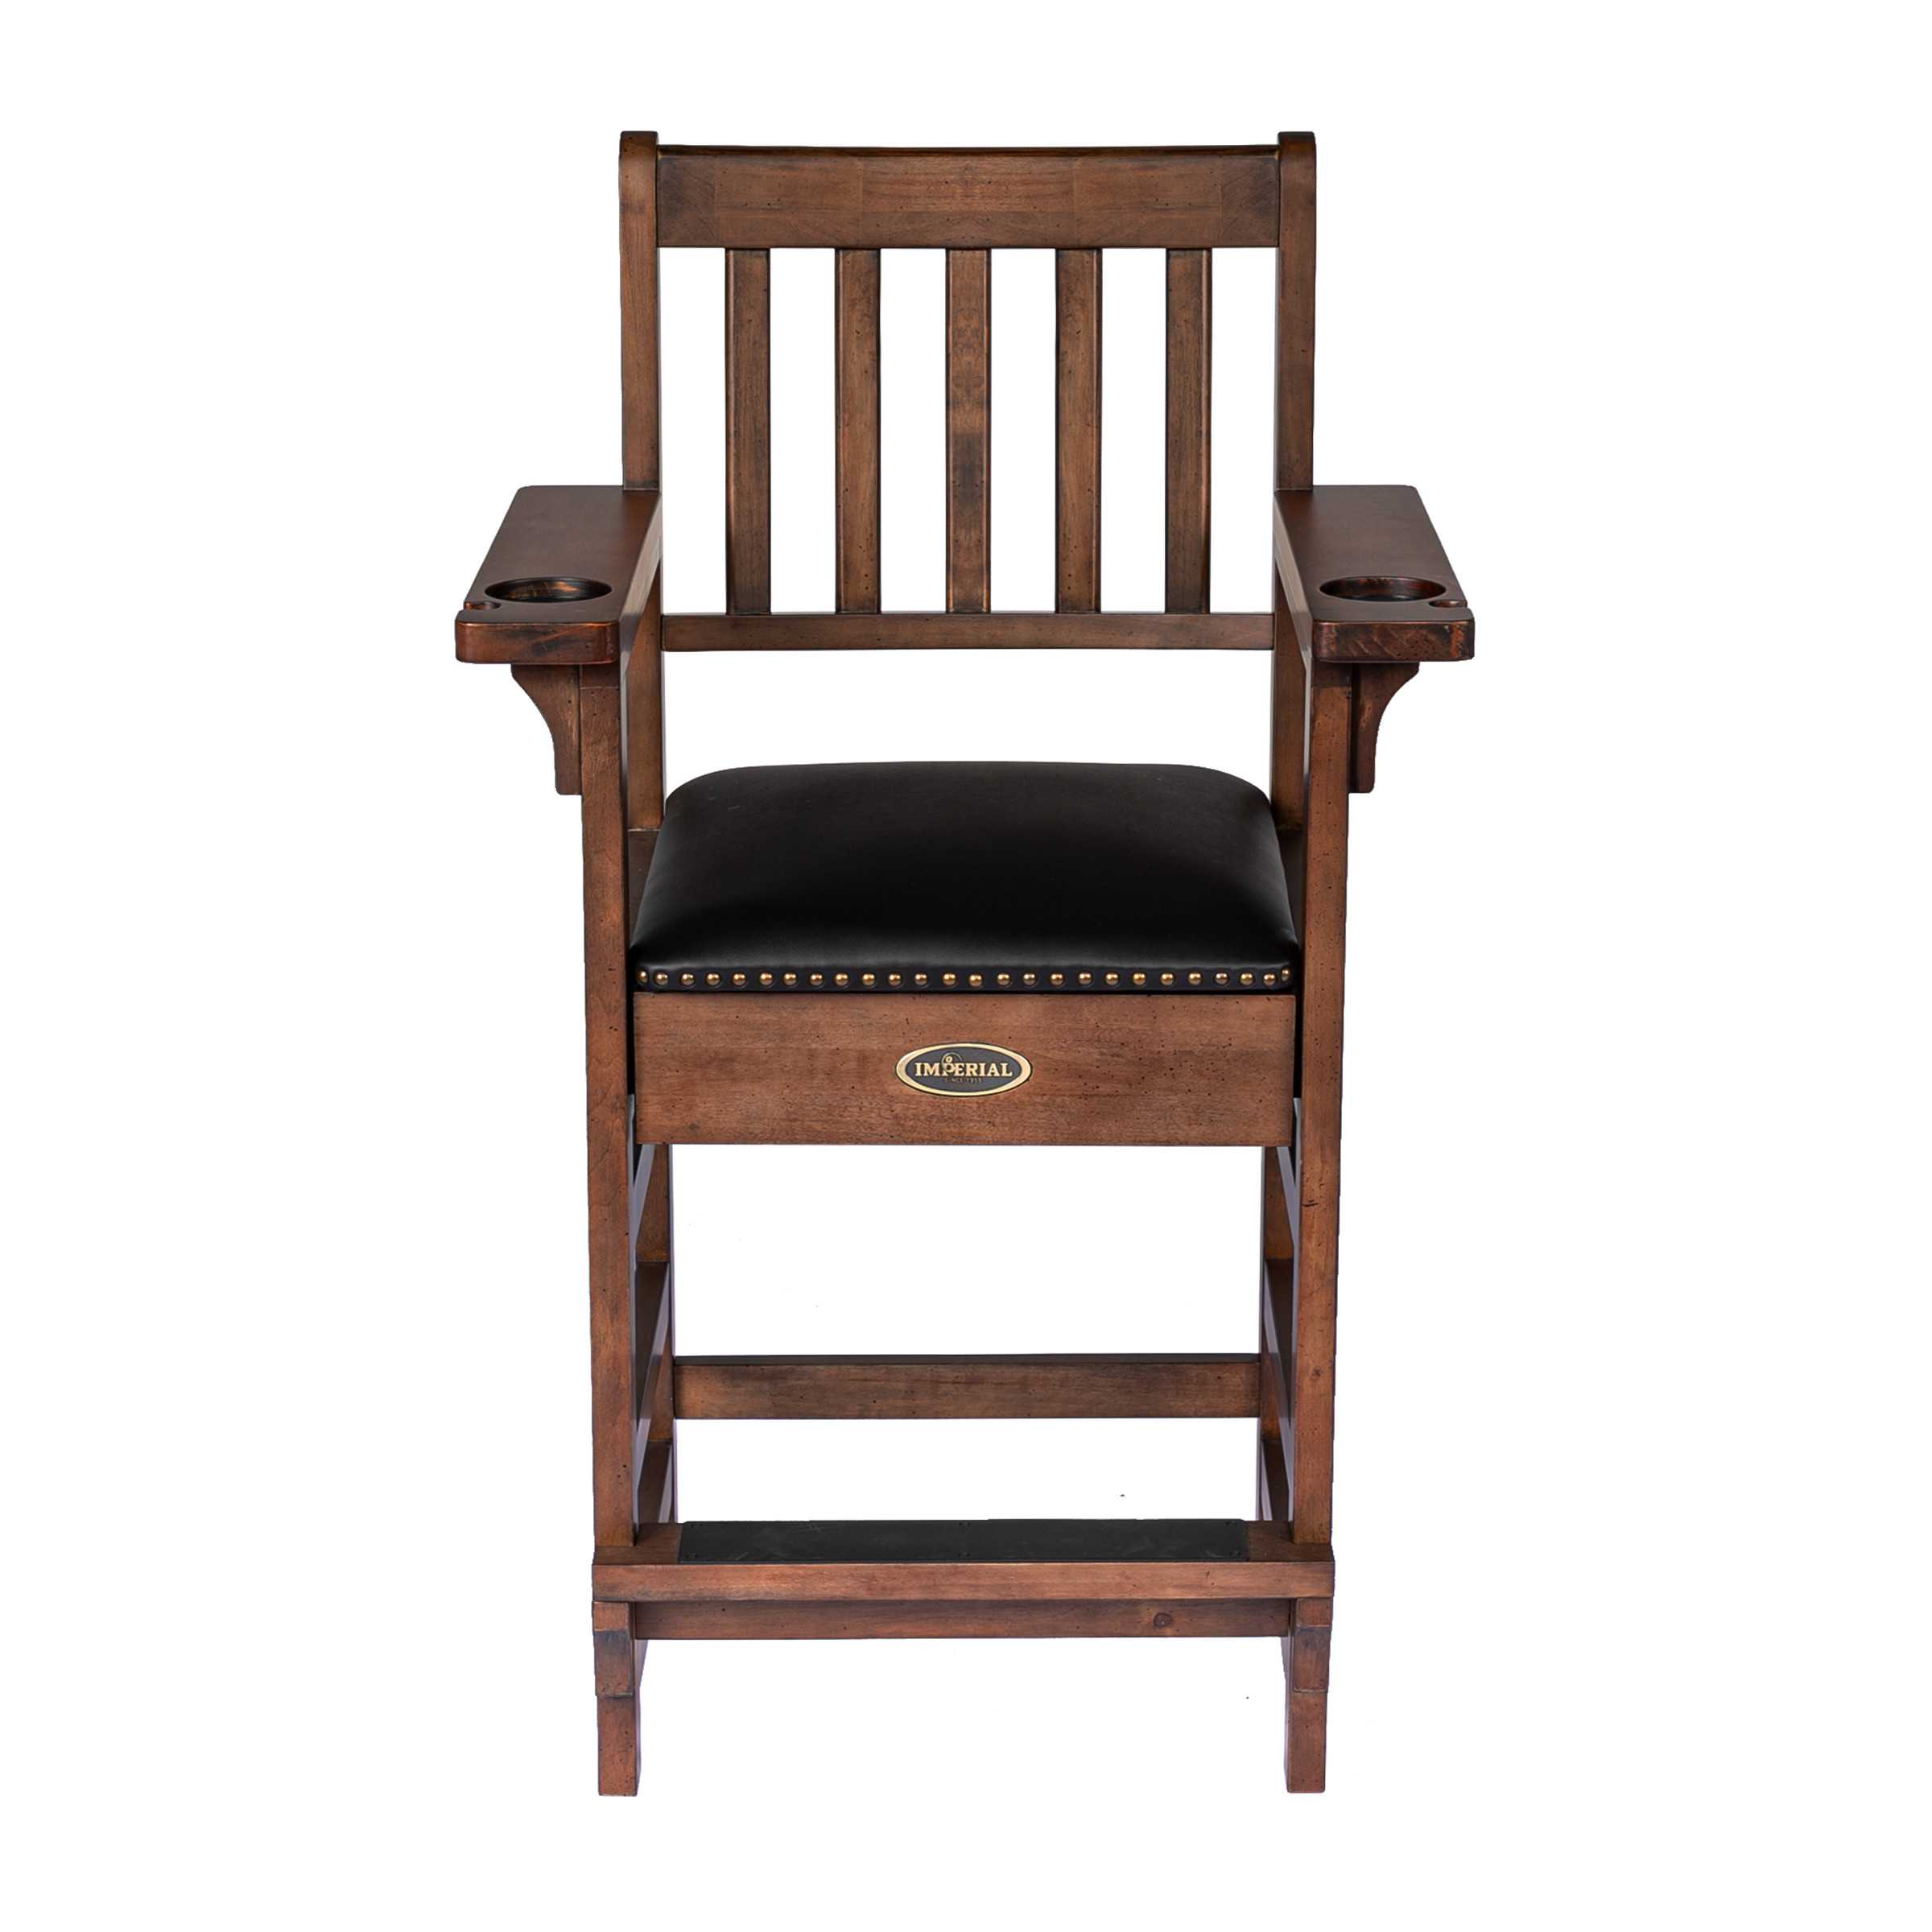 PREMIUM SPECTATOR CHAIR WITH DRAWER WHISKEY